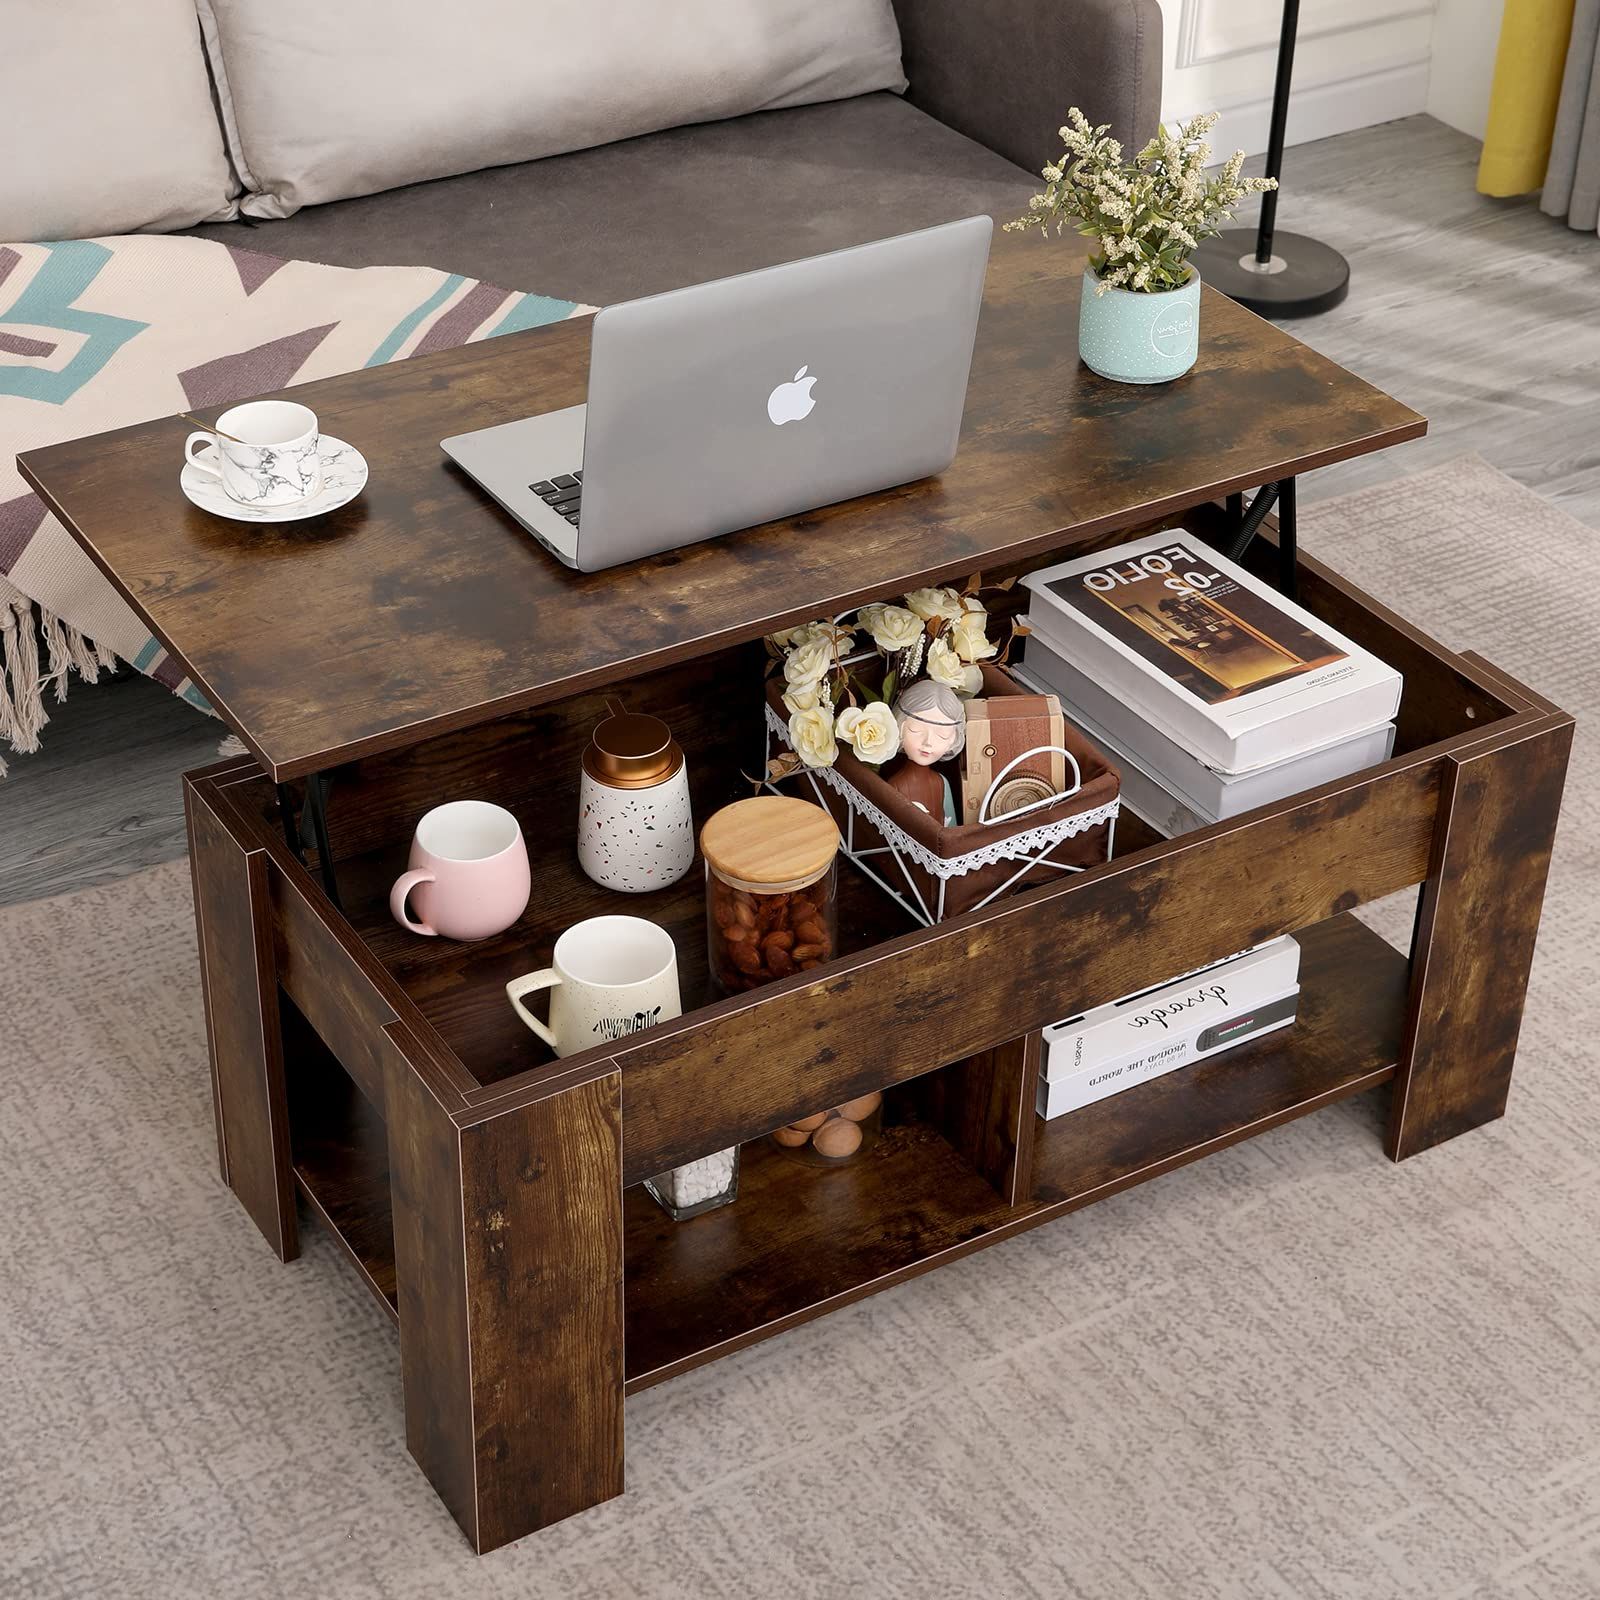 Lift Top Coffee Tables Regarding Well Known Lift Top Coffee Table With Storage, 2 Open Shelves And Hidden Compartment  Lifting Center Table, Modern Wood Coffee Tables For Living Room Reception  Room Office : Amazon.co (View 8 of 10)